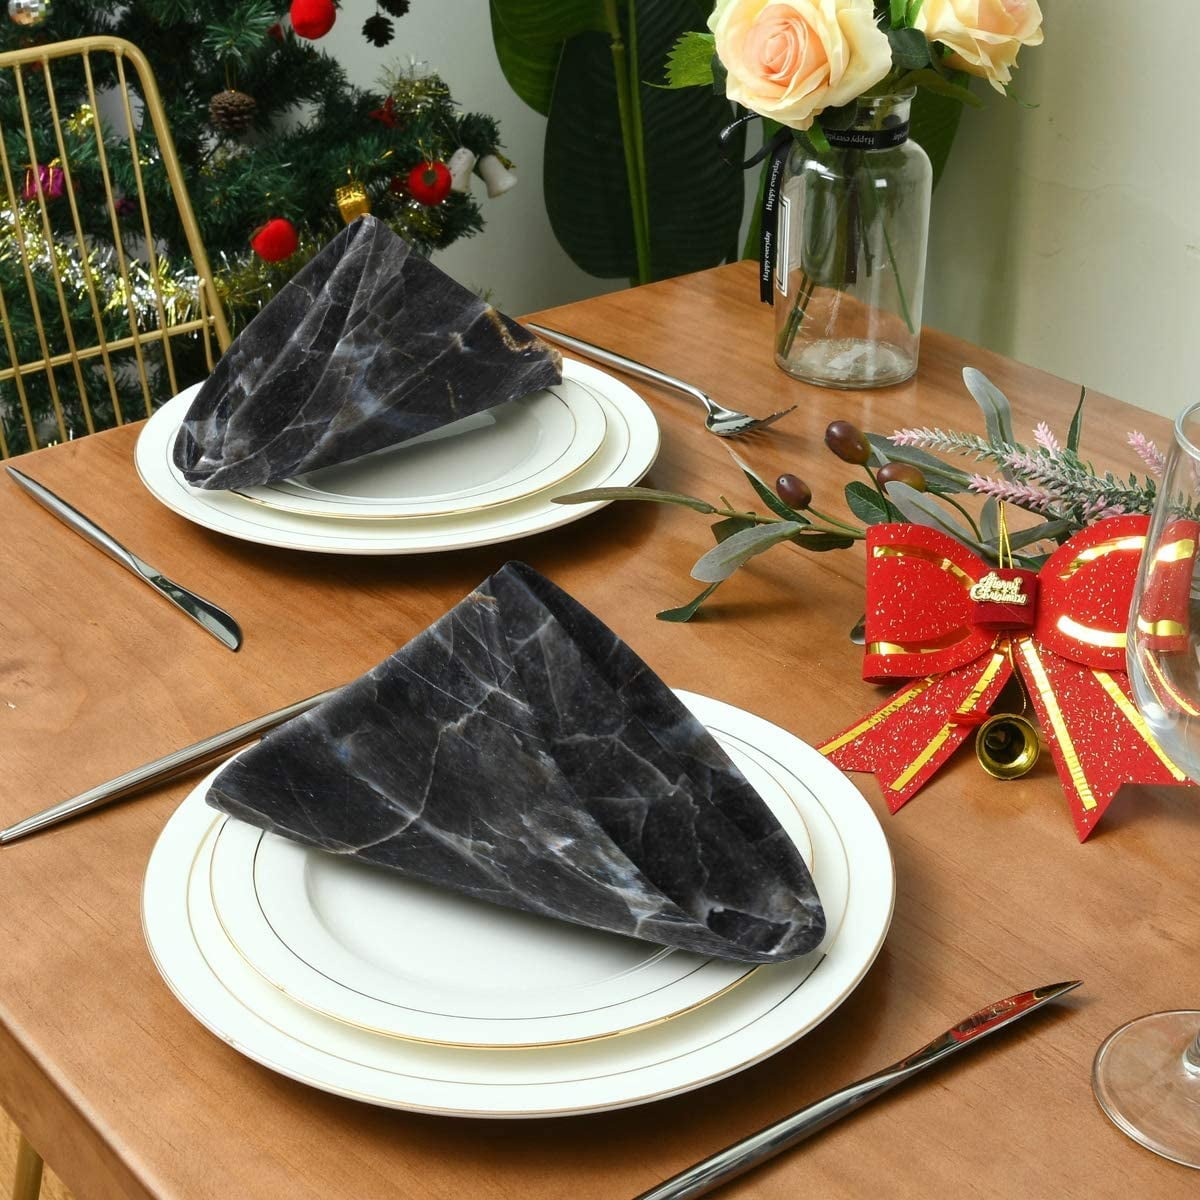 XIAGEANA Black Marble Cloth Napkins Dinner Table Napkins Set of 6 Solid Washable Reusable Polyester Napkins with Hemmed Edges for Home Holiday Party Wedding Decoration 20 x 20 inch 